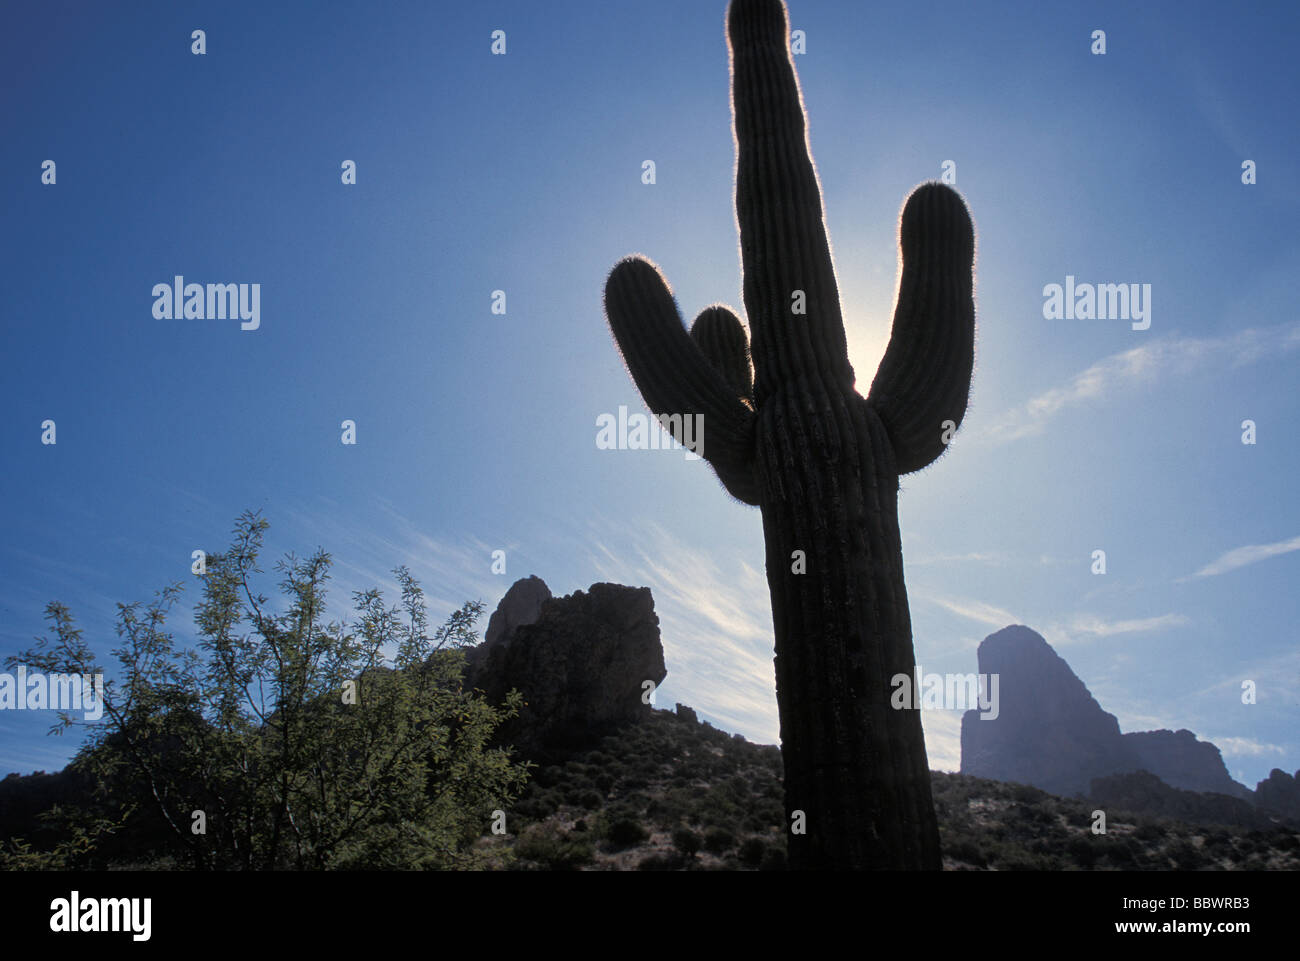 Saguaro cactus with the Weavers Needle in the background in the Superstition Mountains of central Arizona Stock Photo